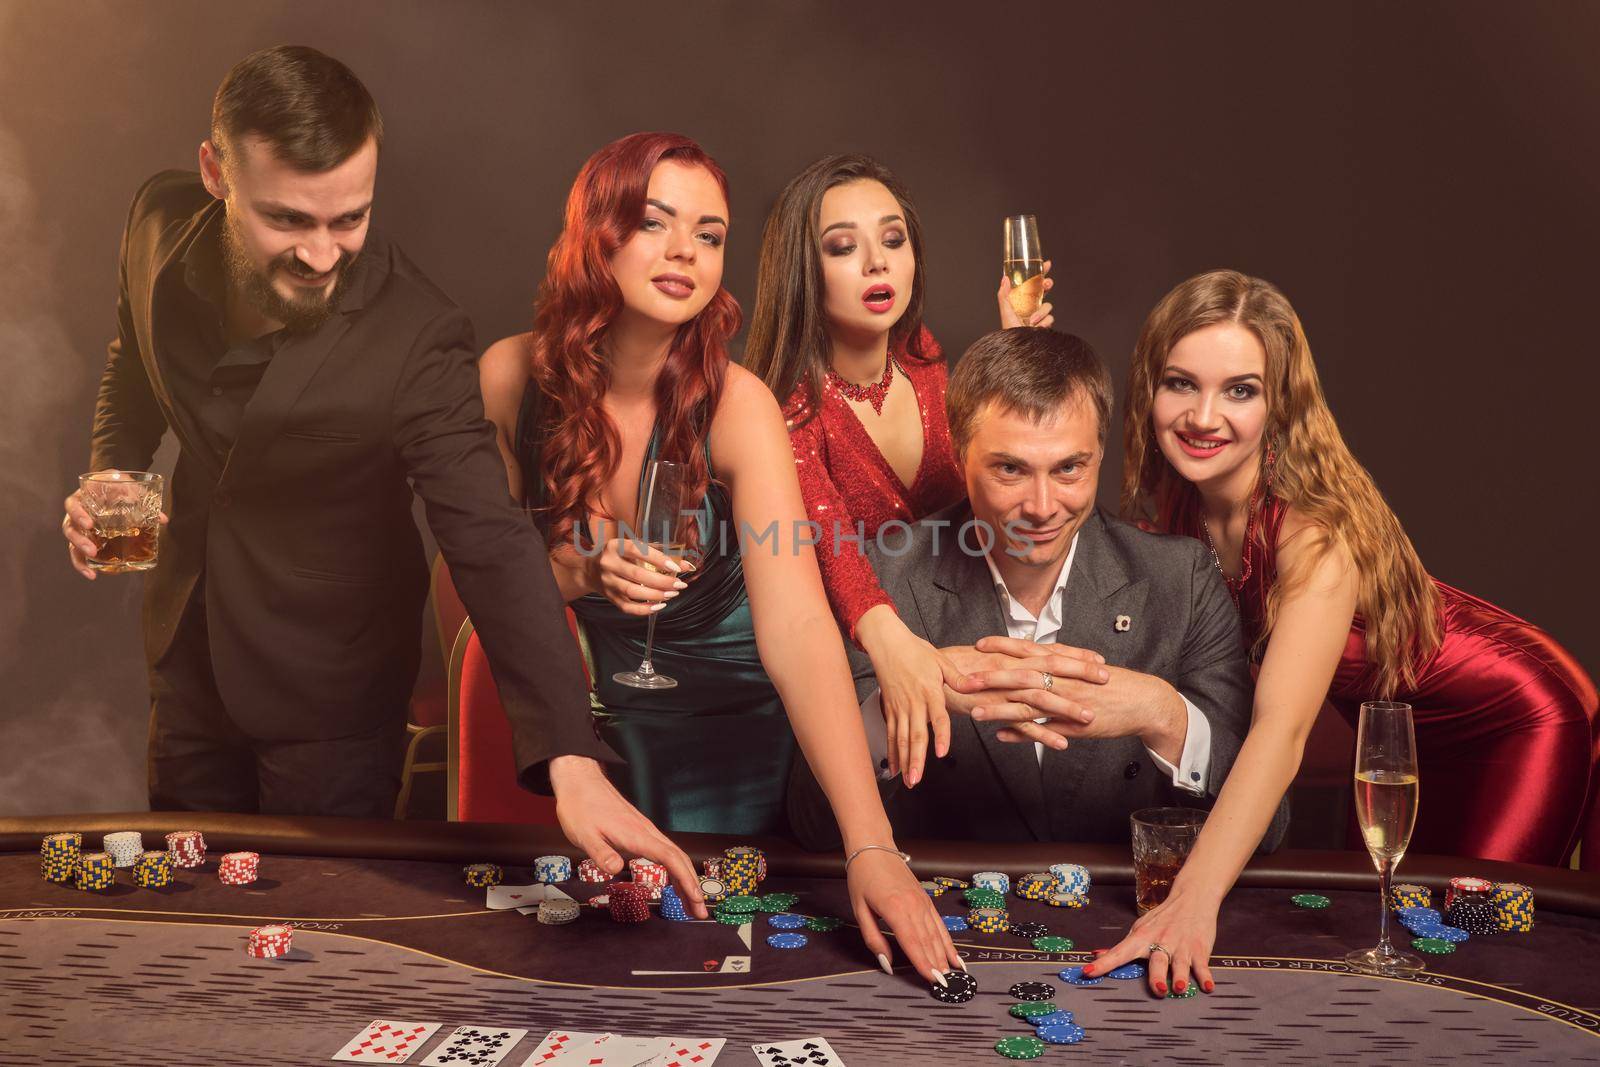 Funny partners are playing poker at casino. They are celebrating their win, smiling and looking vey excited while posing at the table against a dark smoke background. Cards, chips, money, alcohol, gambling, entertainment concept.